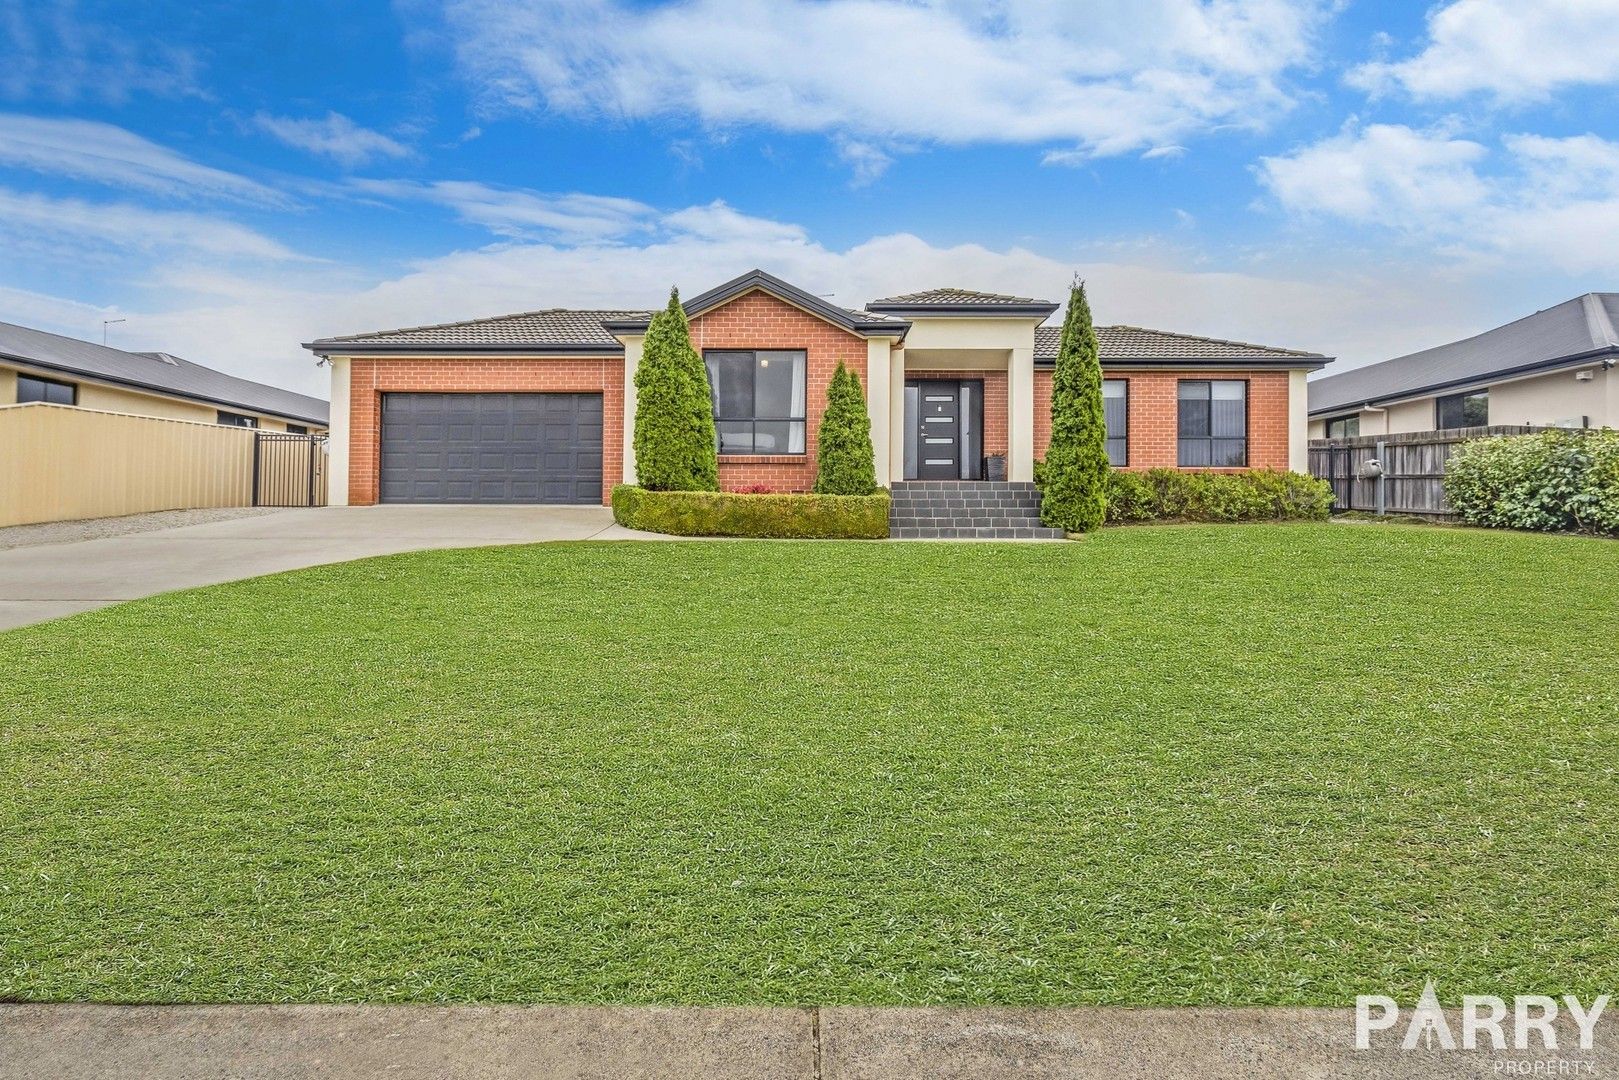 4 bedrooms House in 12 Integrity Drive YOUNGTOWN TAS, 7249